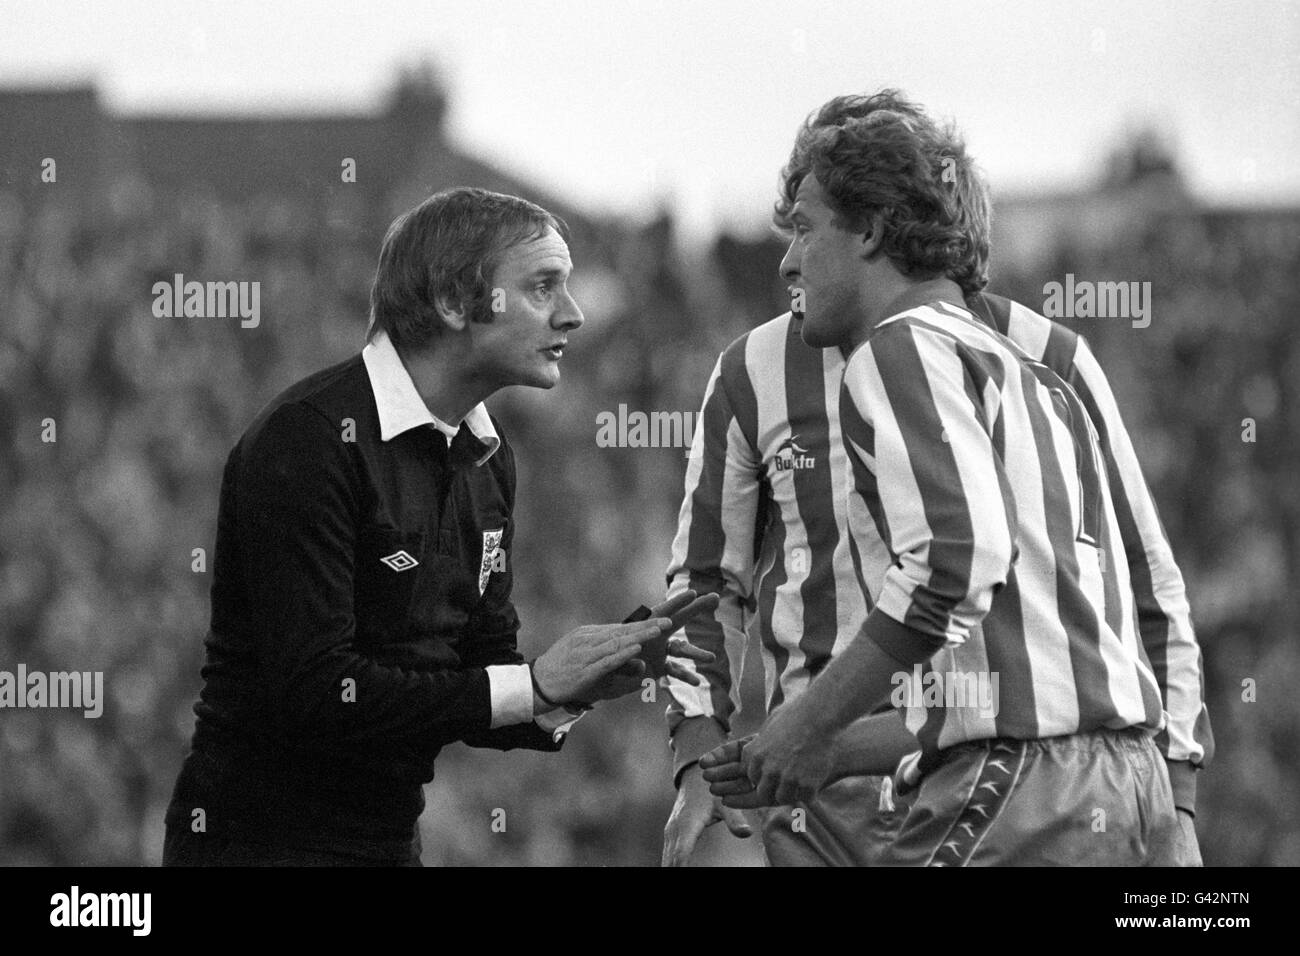 Referee SG Bates tries to calm Sheffield Wednesday's Gary Megson (r) during their match against Crystal Palace Stock Photo